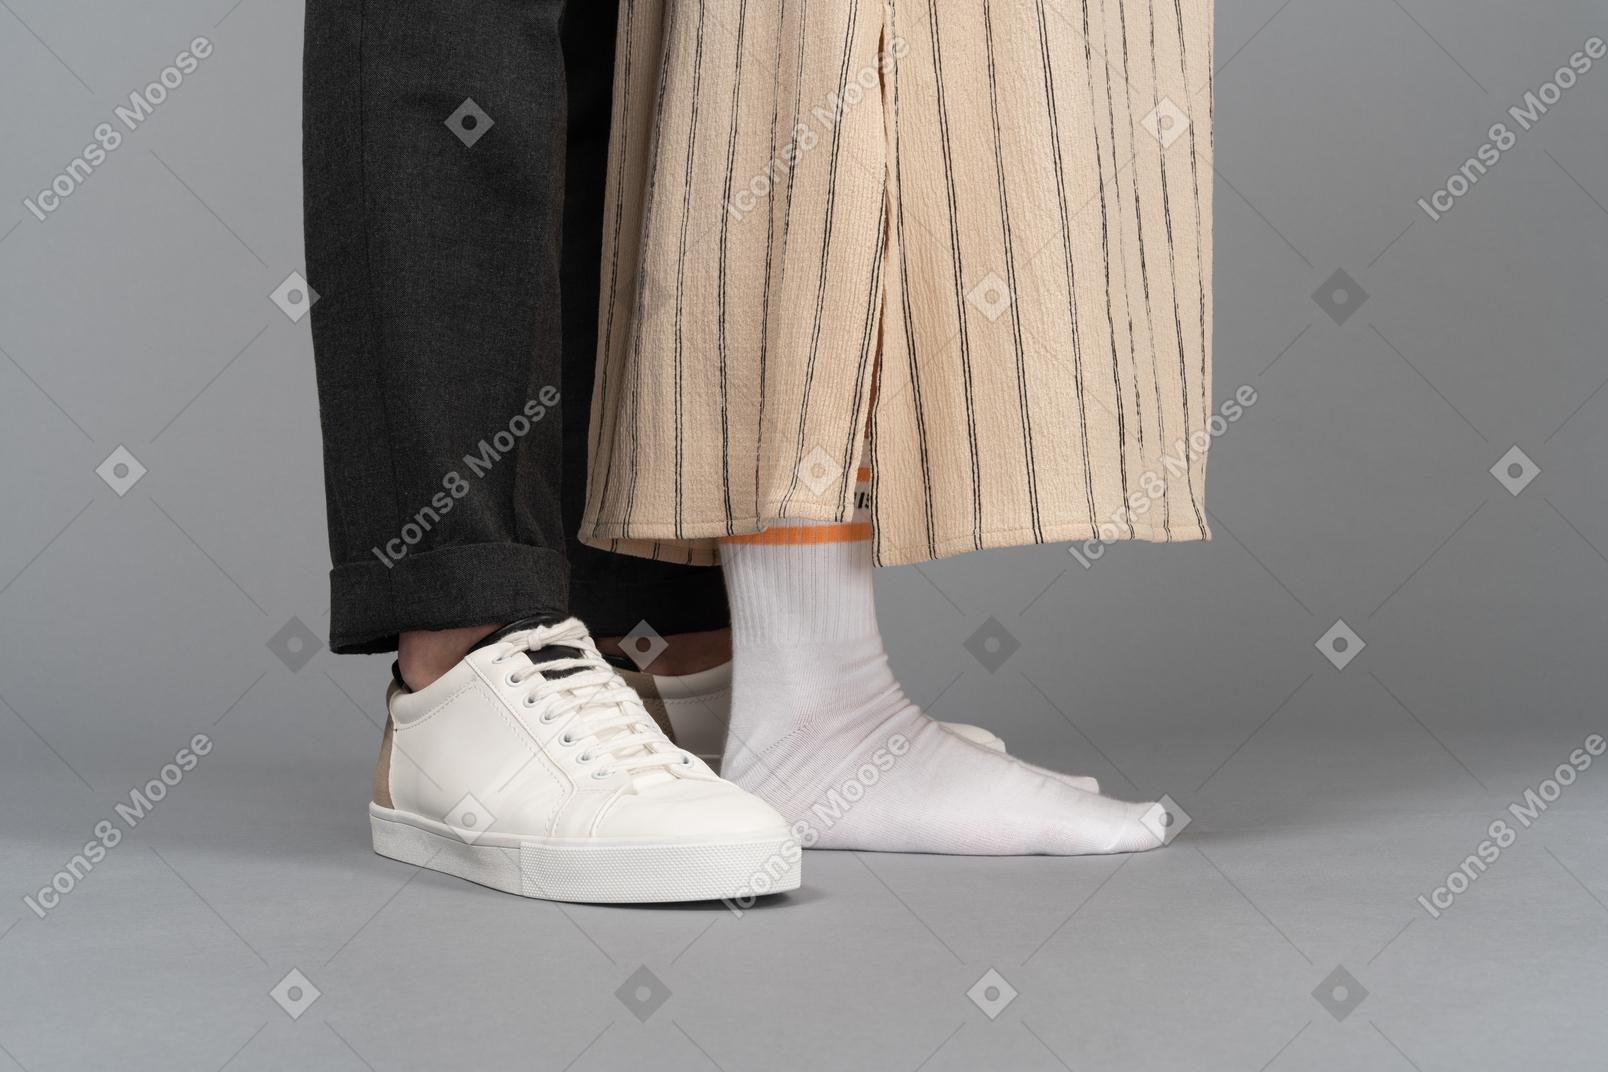 Close-up of man's sneakers and woman's socks